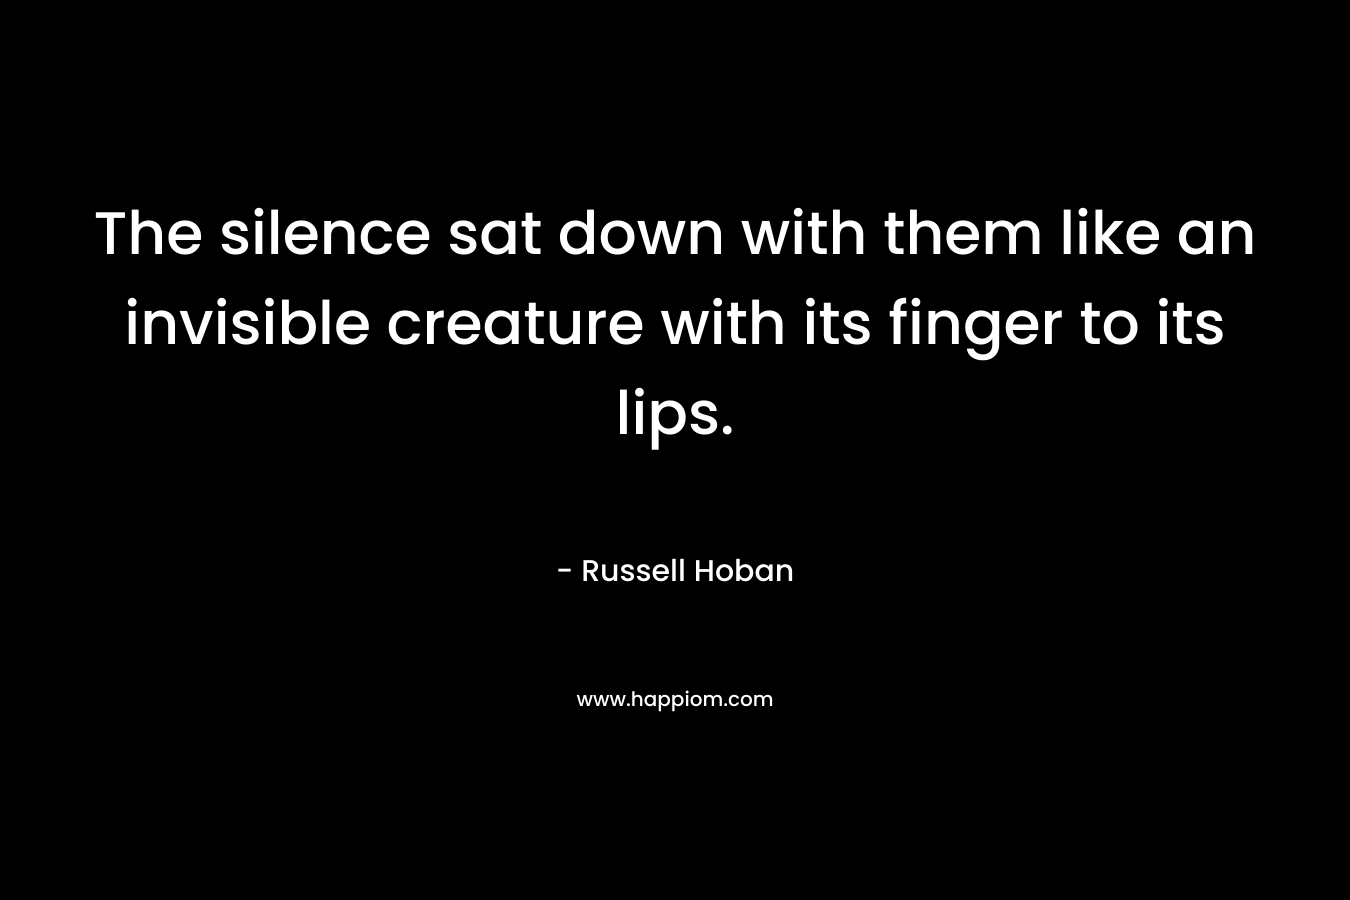 The silence sat down with them like an invisible creature with its finger to its lips. – Russell Hoban